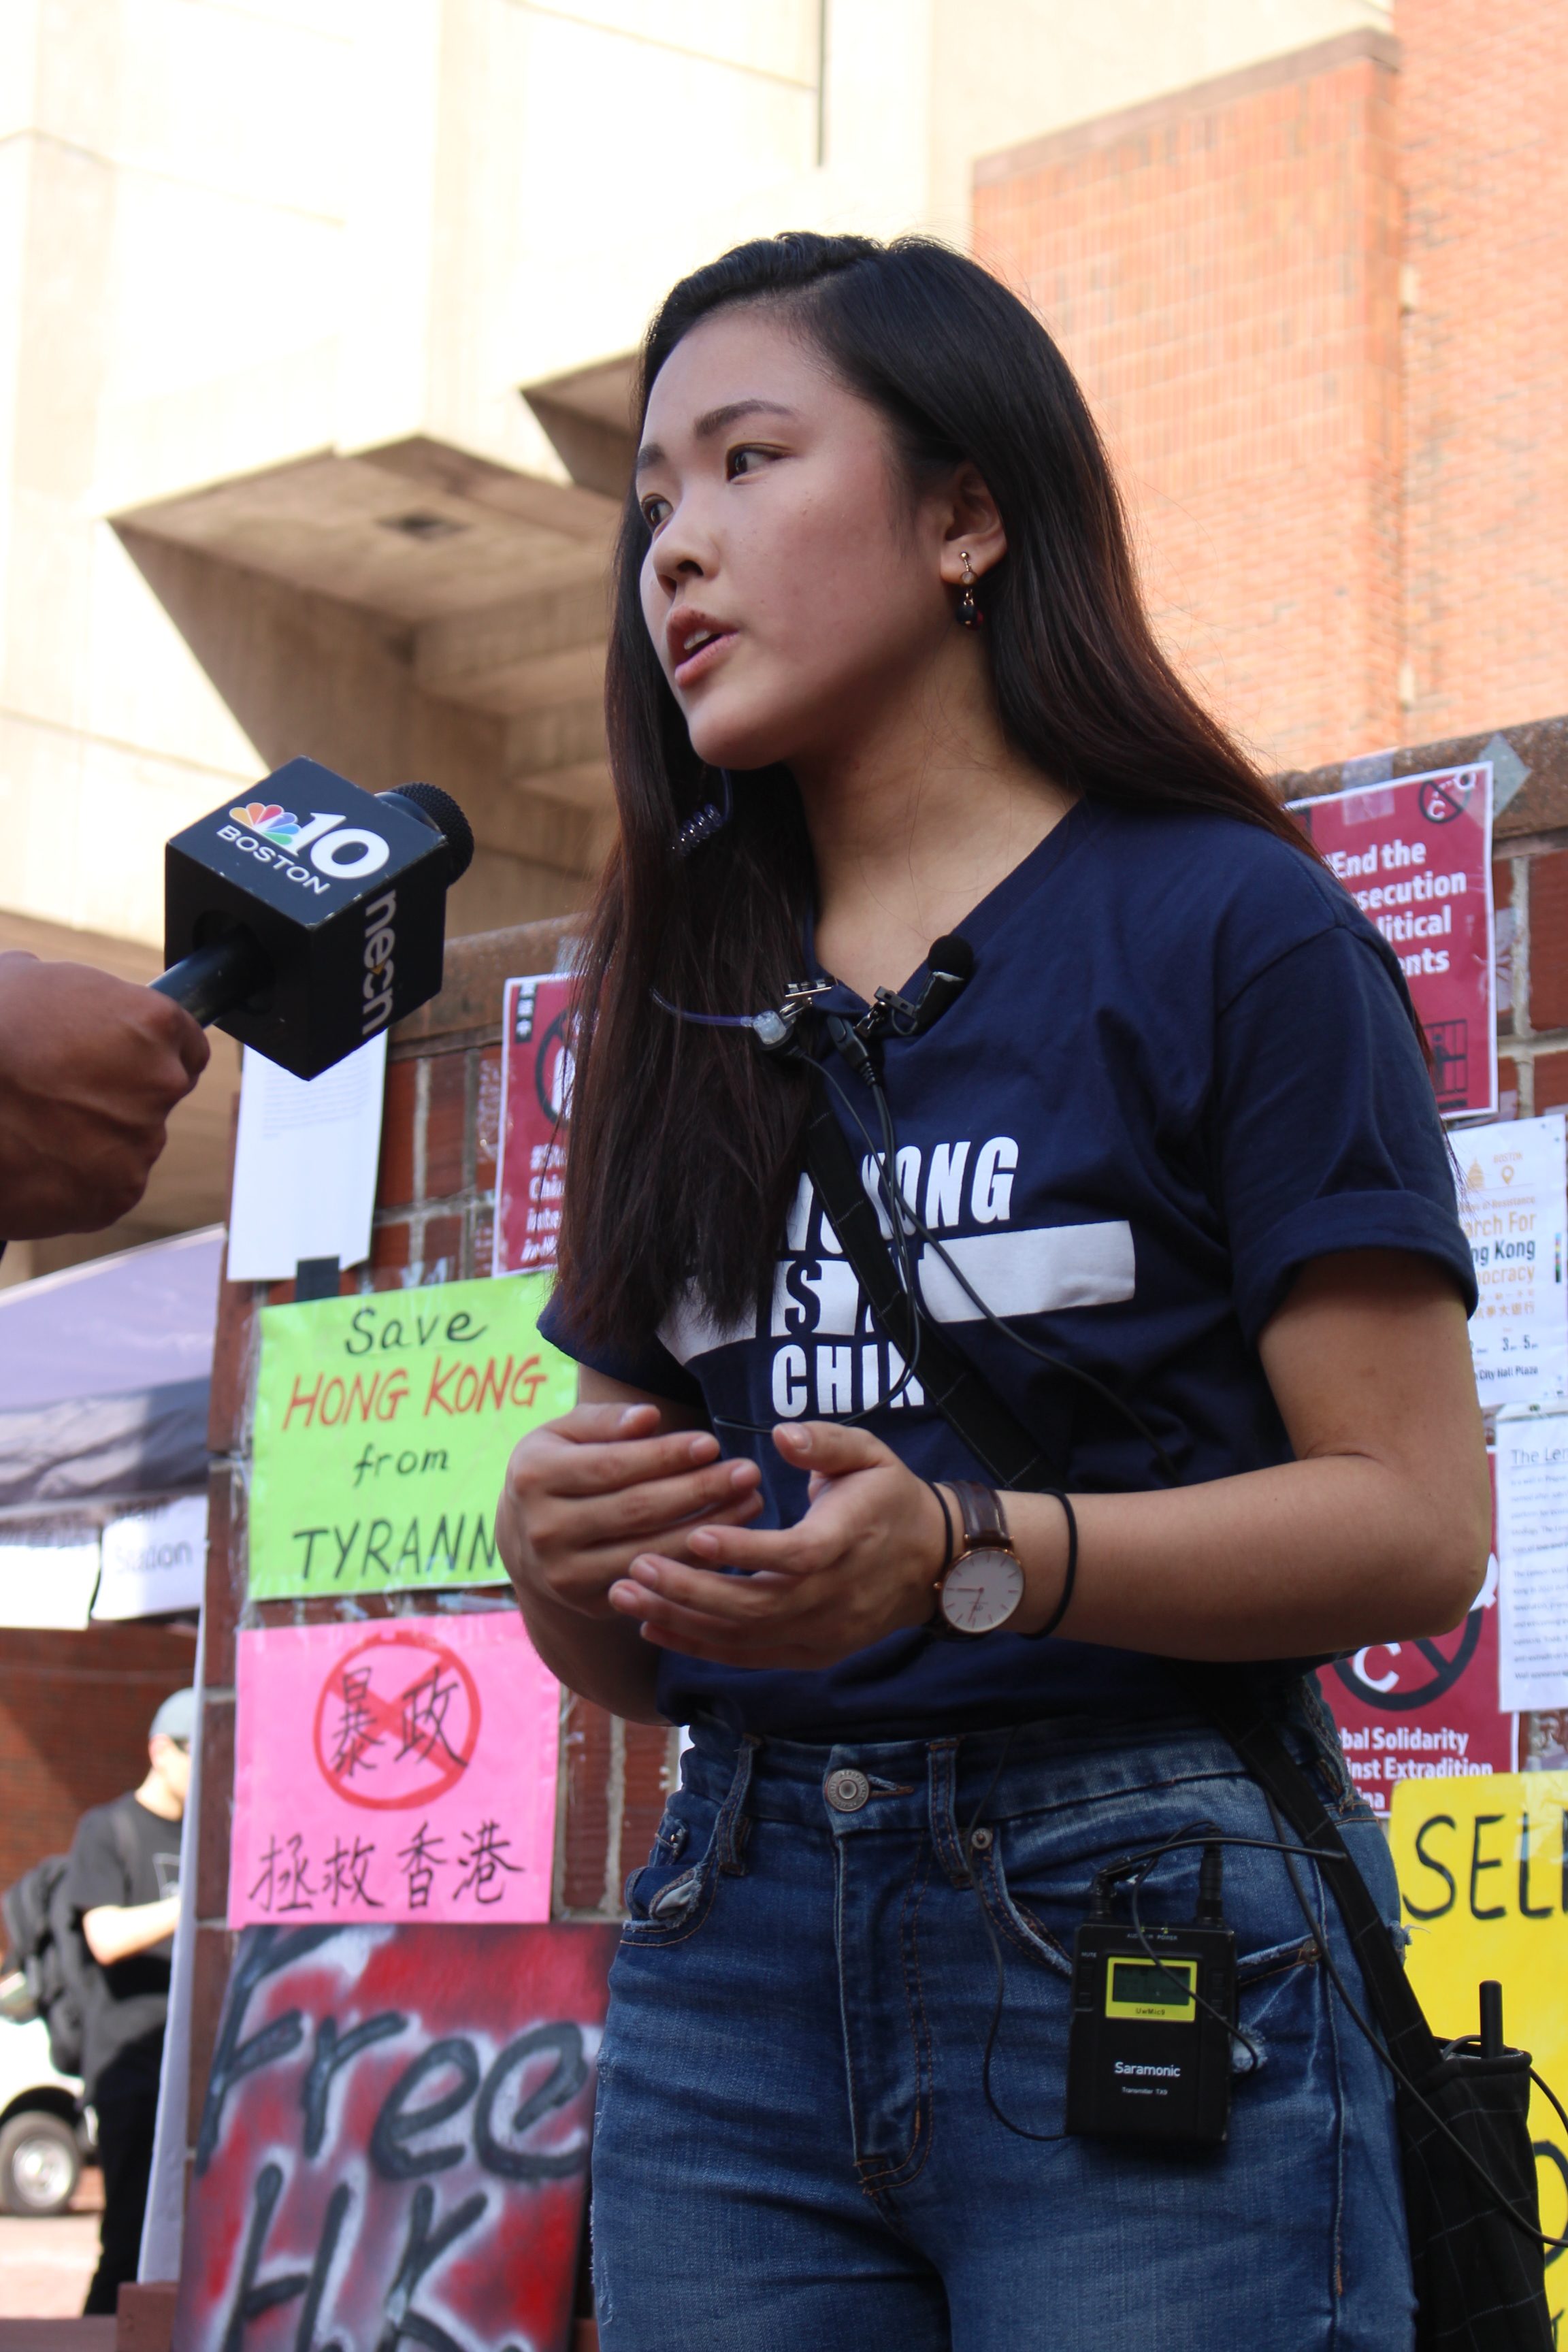 Emerson student and event organizer, Frances Hui, 19, spoke in support of the Hong Kong Human Rights Act currently being debated in Congress. Photo by Lex Weaver.